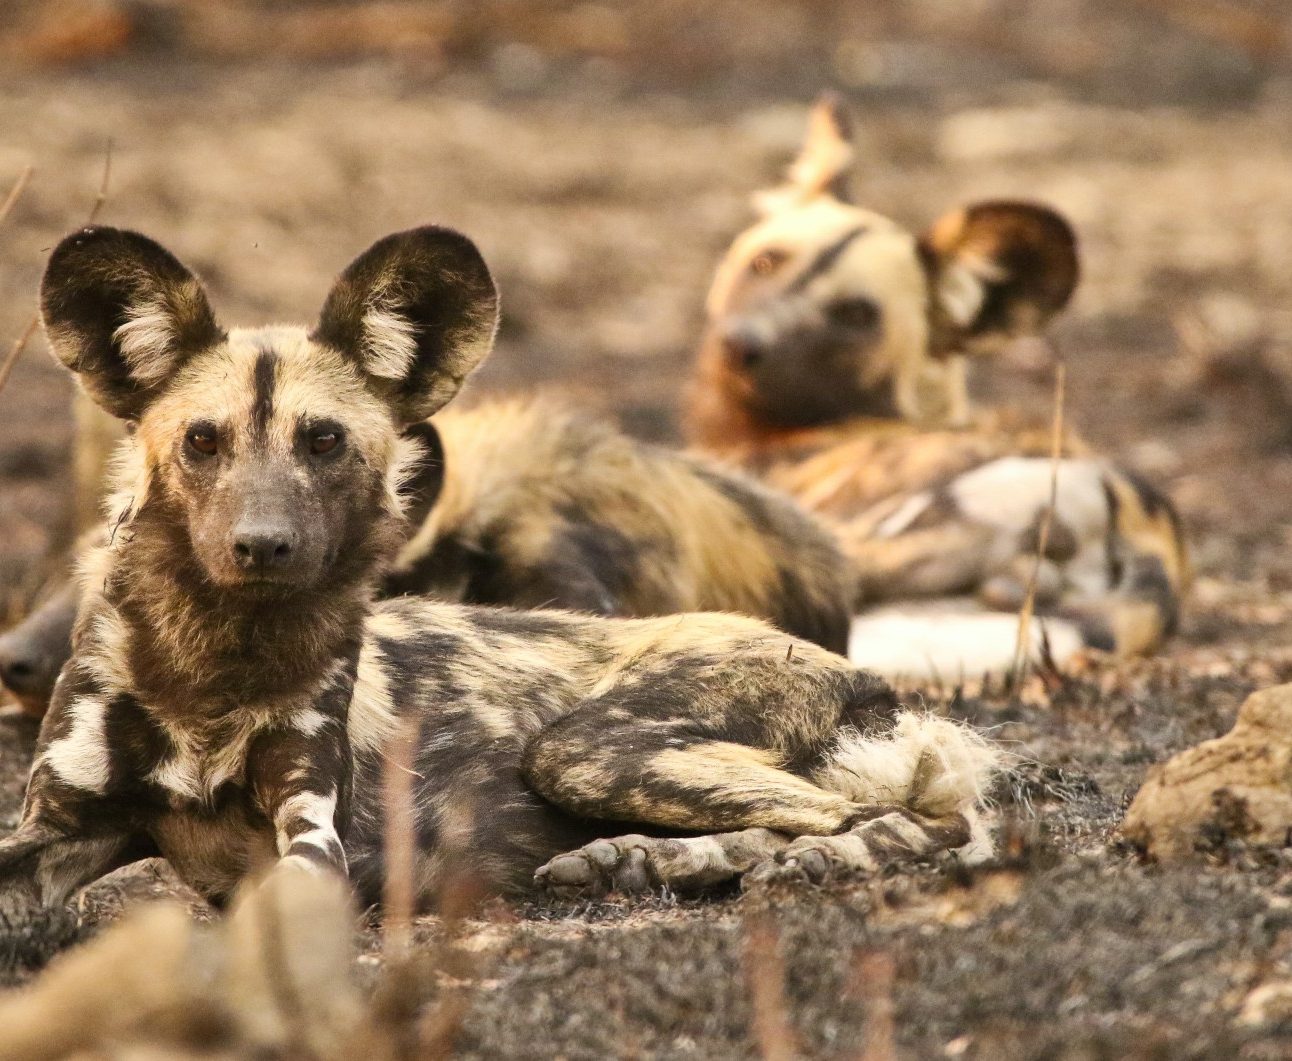 A group of wild dogs lying down together